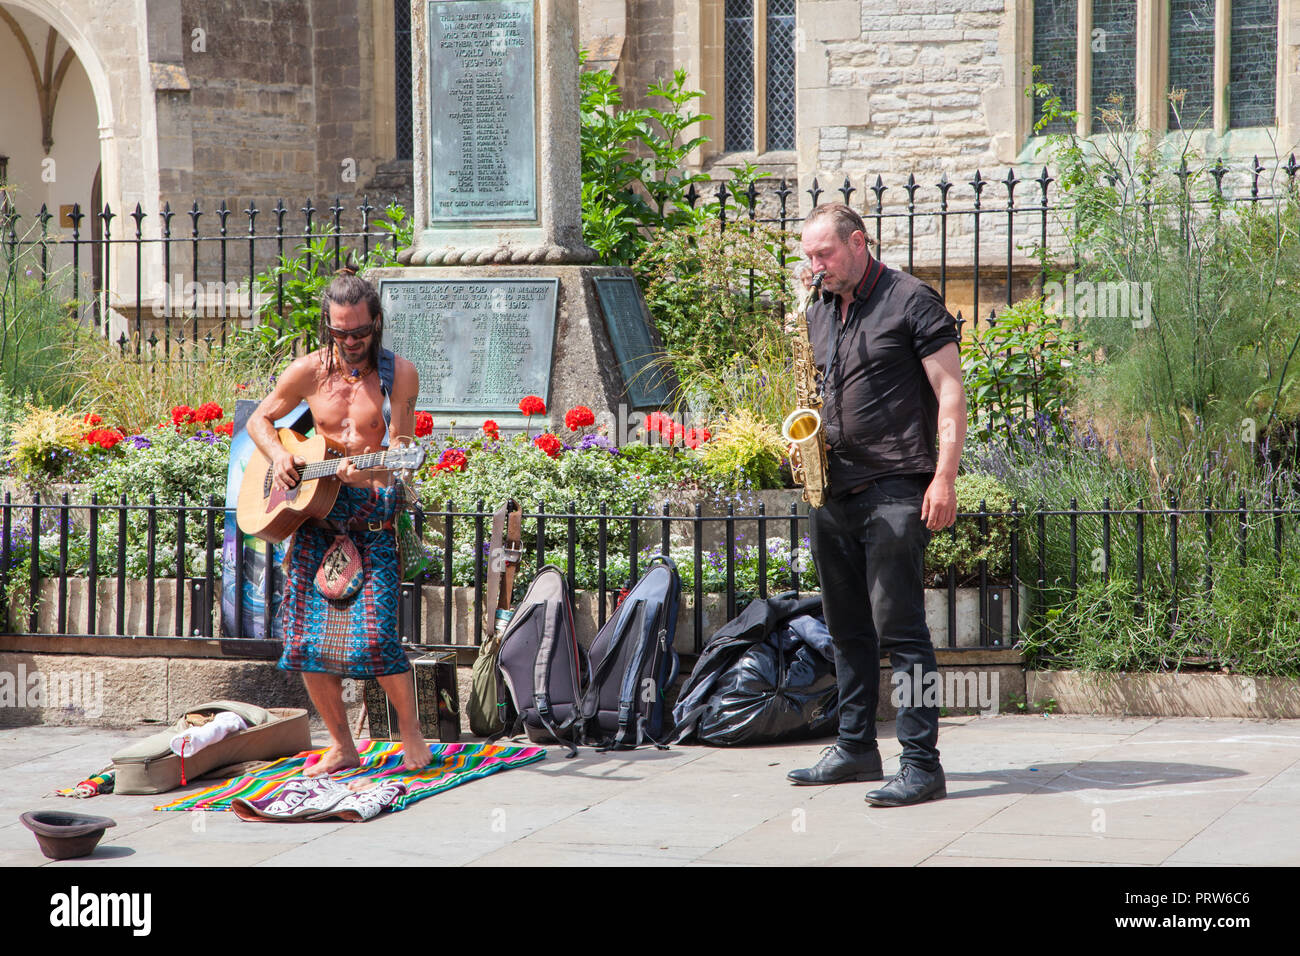 Street artists buskers and musicians preform for the public on the pavement in the main street of Glastonbury England UK Stock Photo